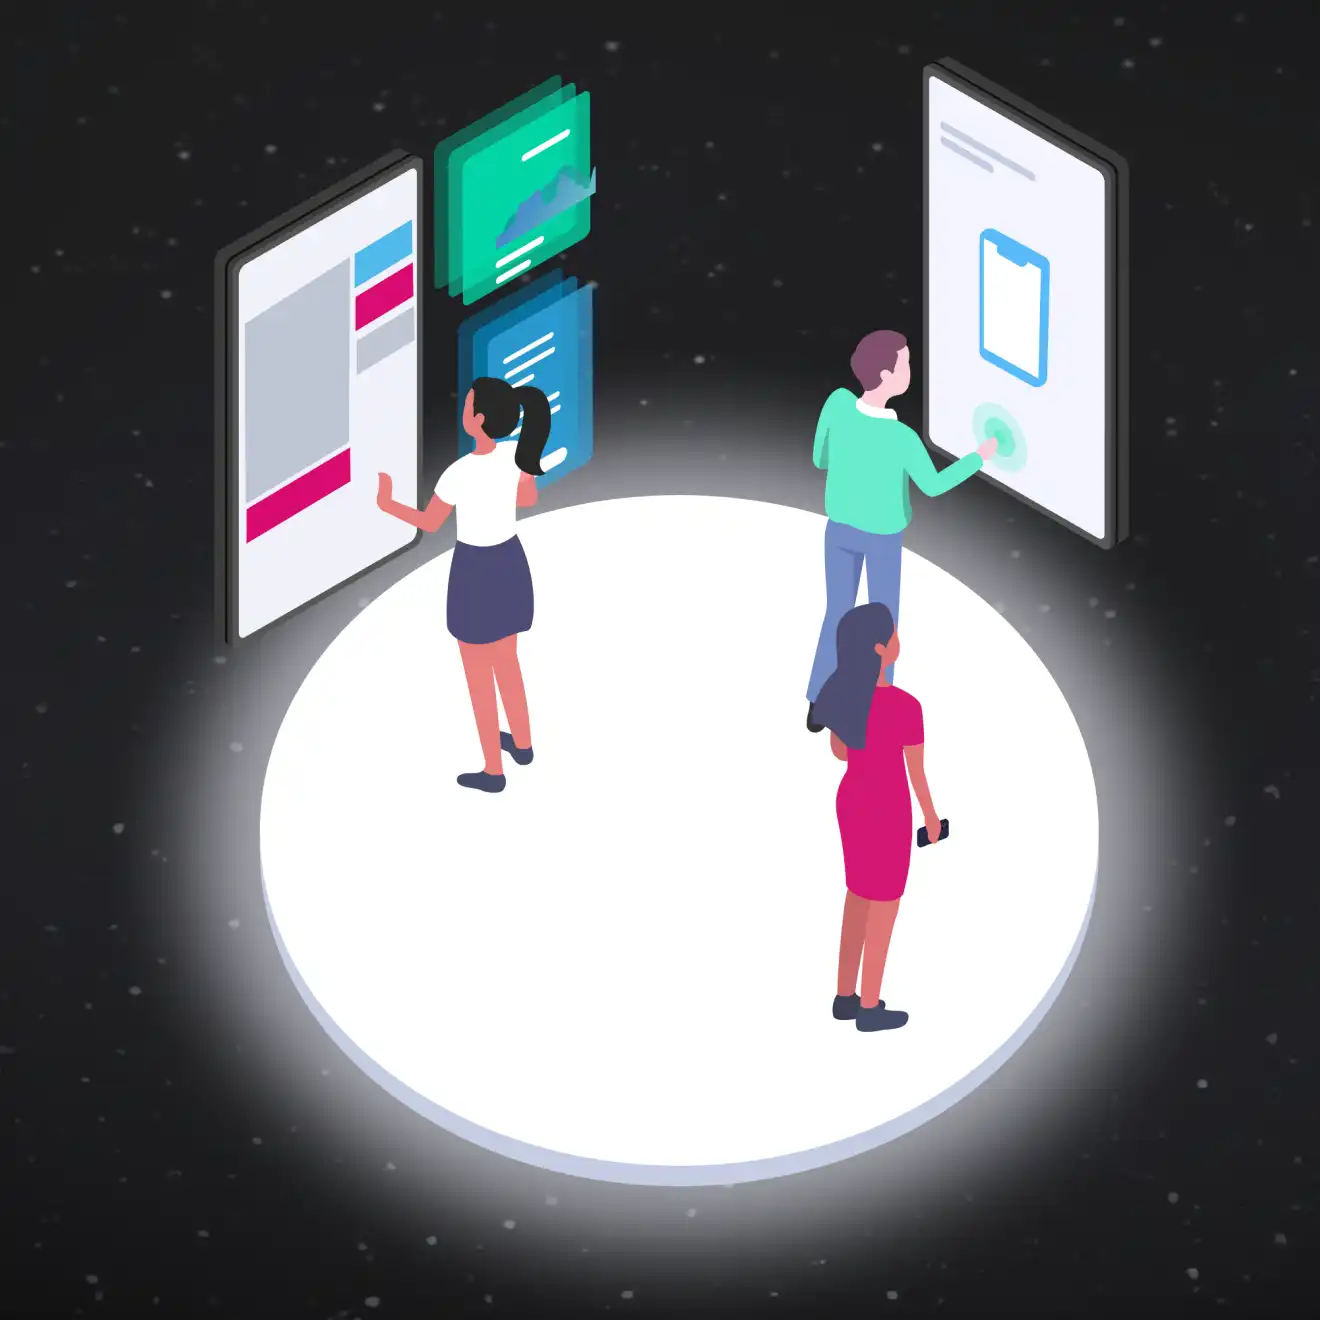 Illustration with people interacting with different screens